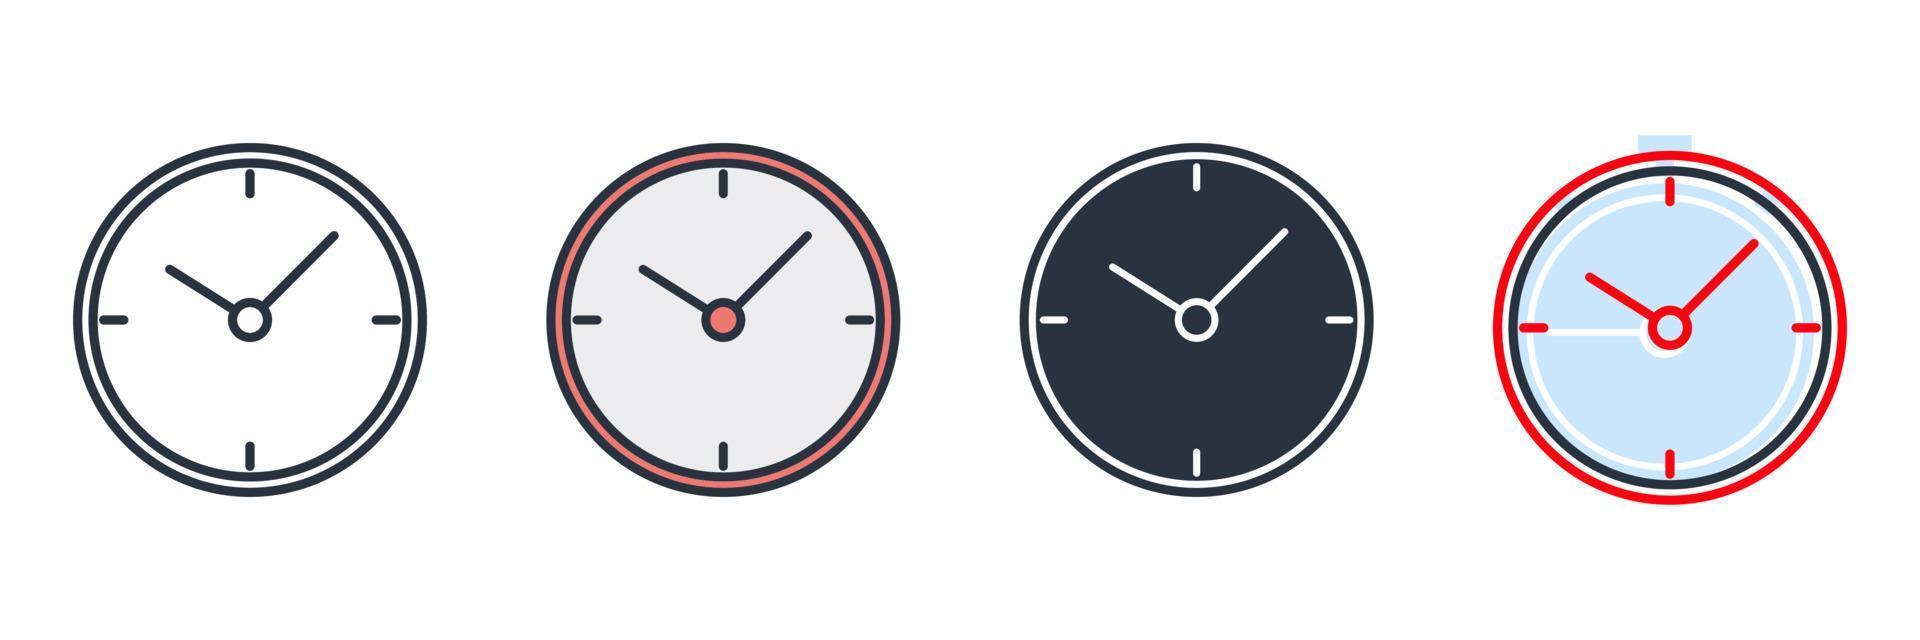 clocks icon logo vector illustration. time symbol template for graphic and web design collection